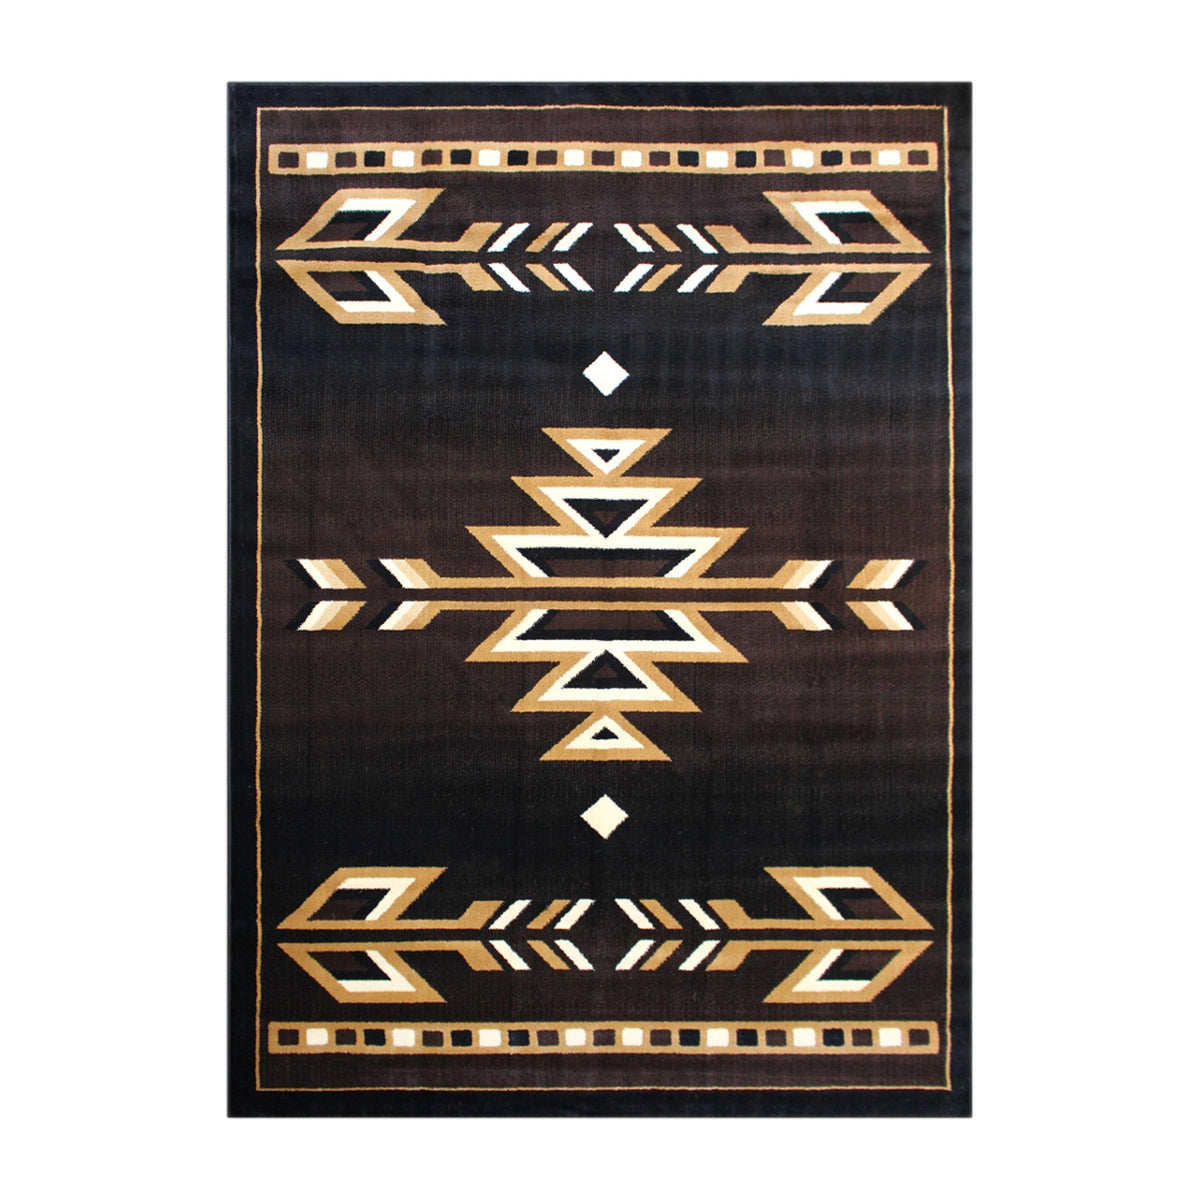 Brown,8' x 10' |#| Southwestern Style Area Rug in Shades of Brown, Beige, and Black - 8' x 10'